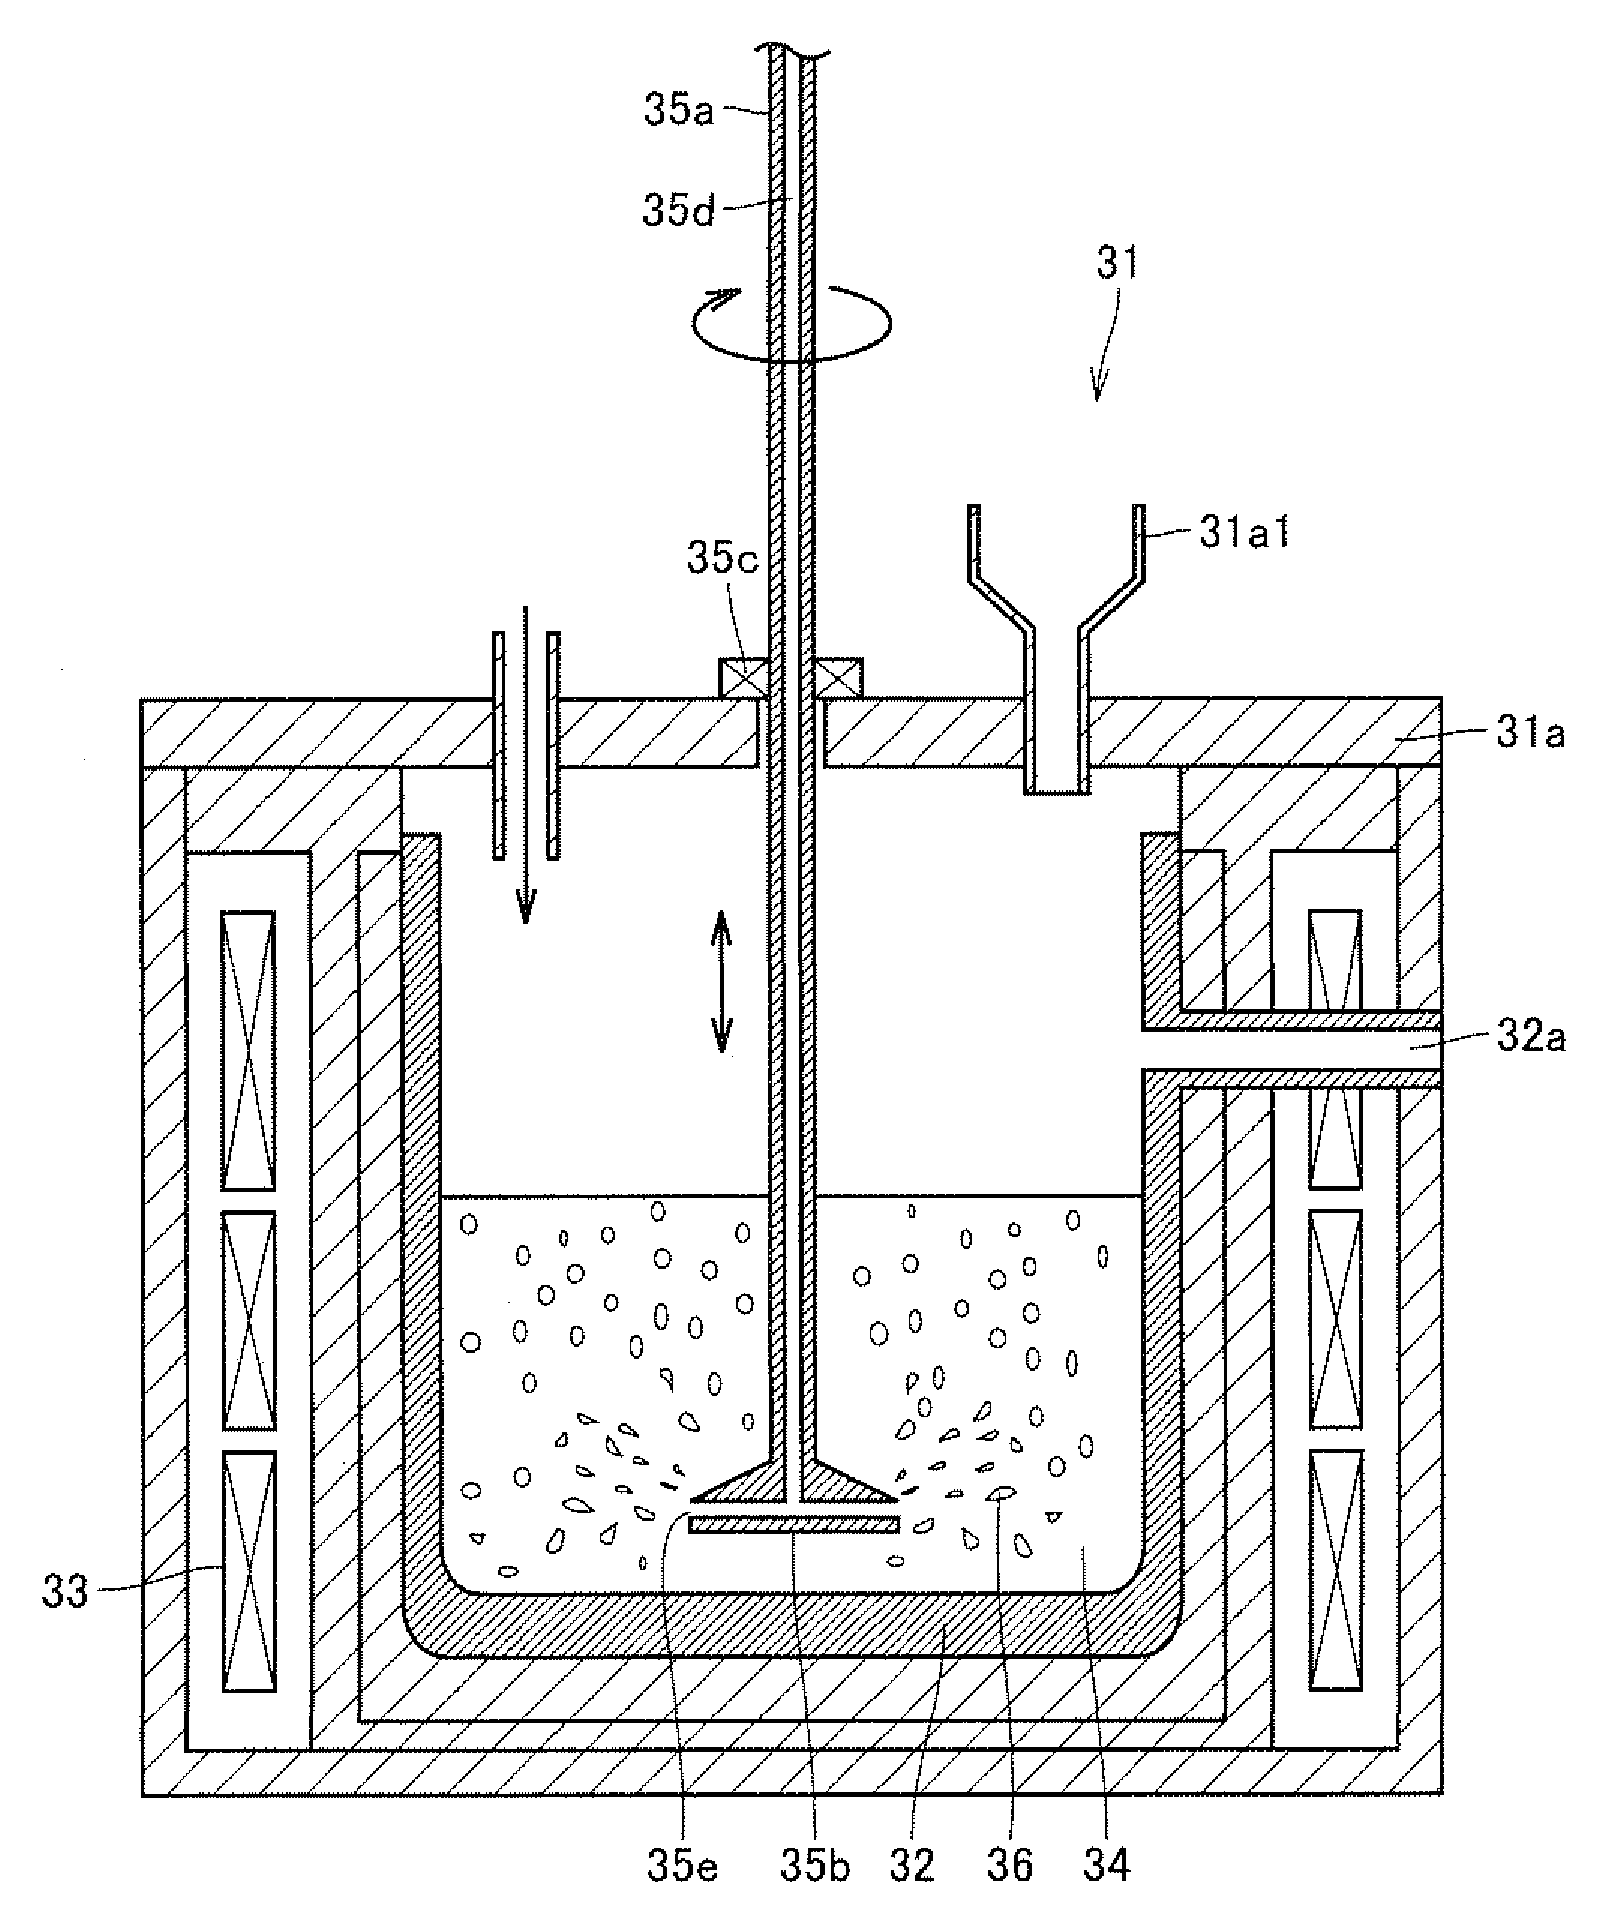 Silicon recycling method, and silicon and silicon ingot manufactured with that method